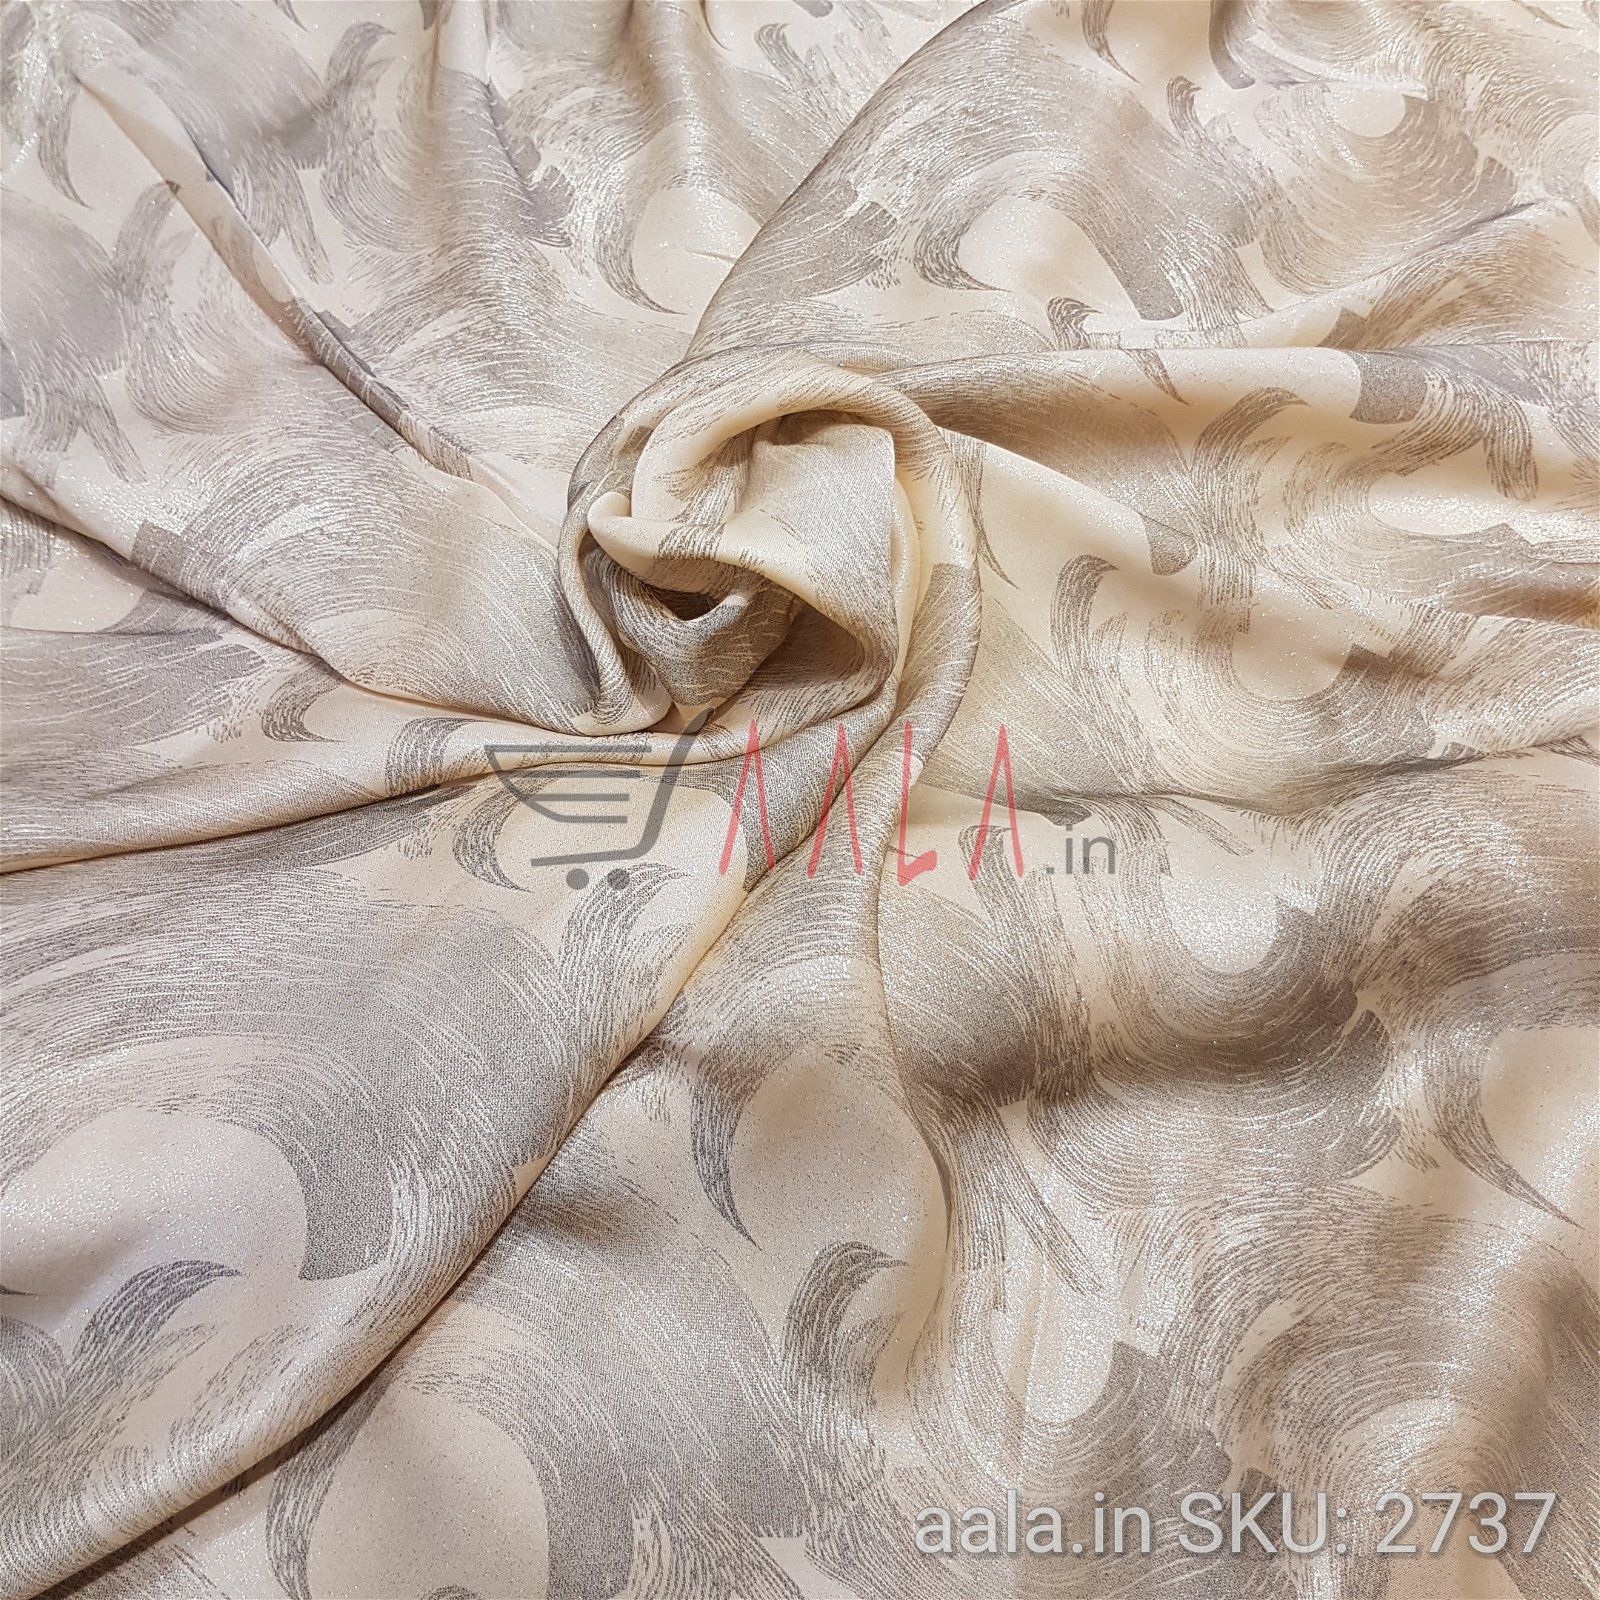 Foil Print Satin Georgette Poly-ester 44 Inches Dyed Per Metre #2737